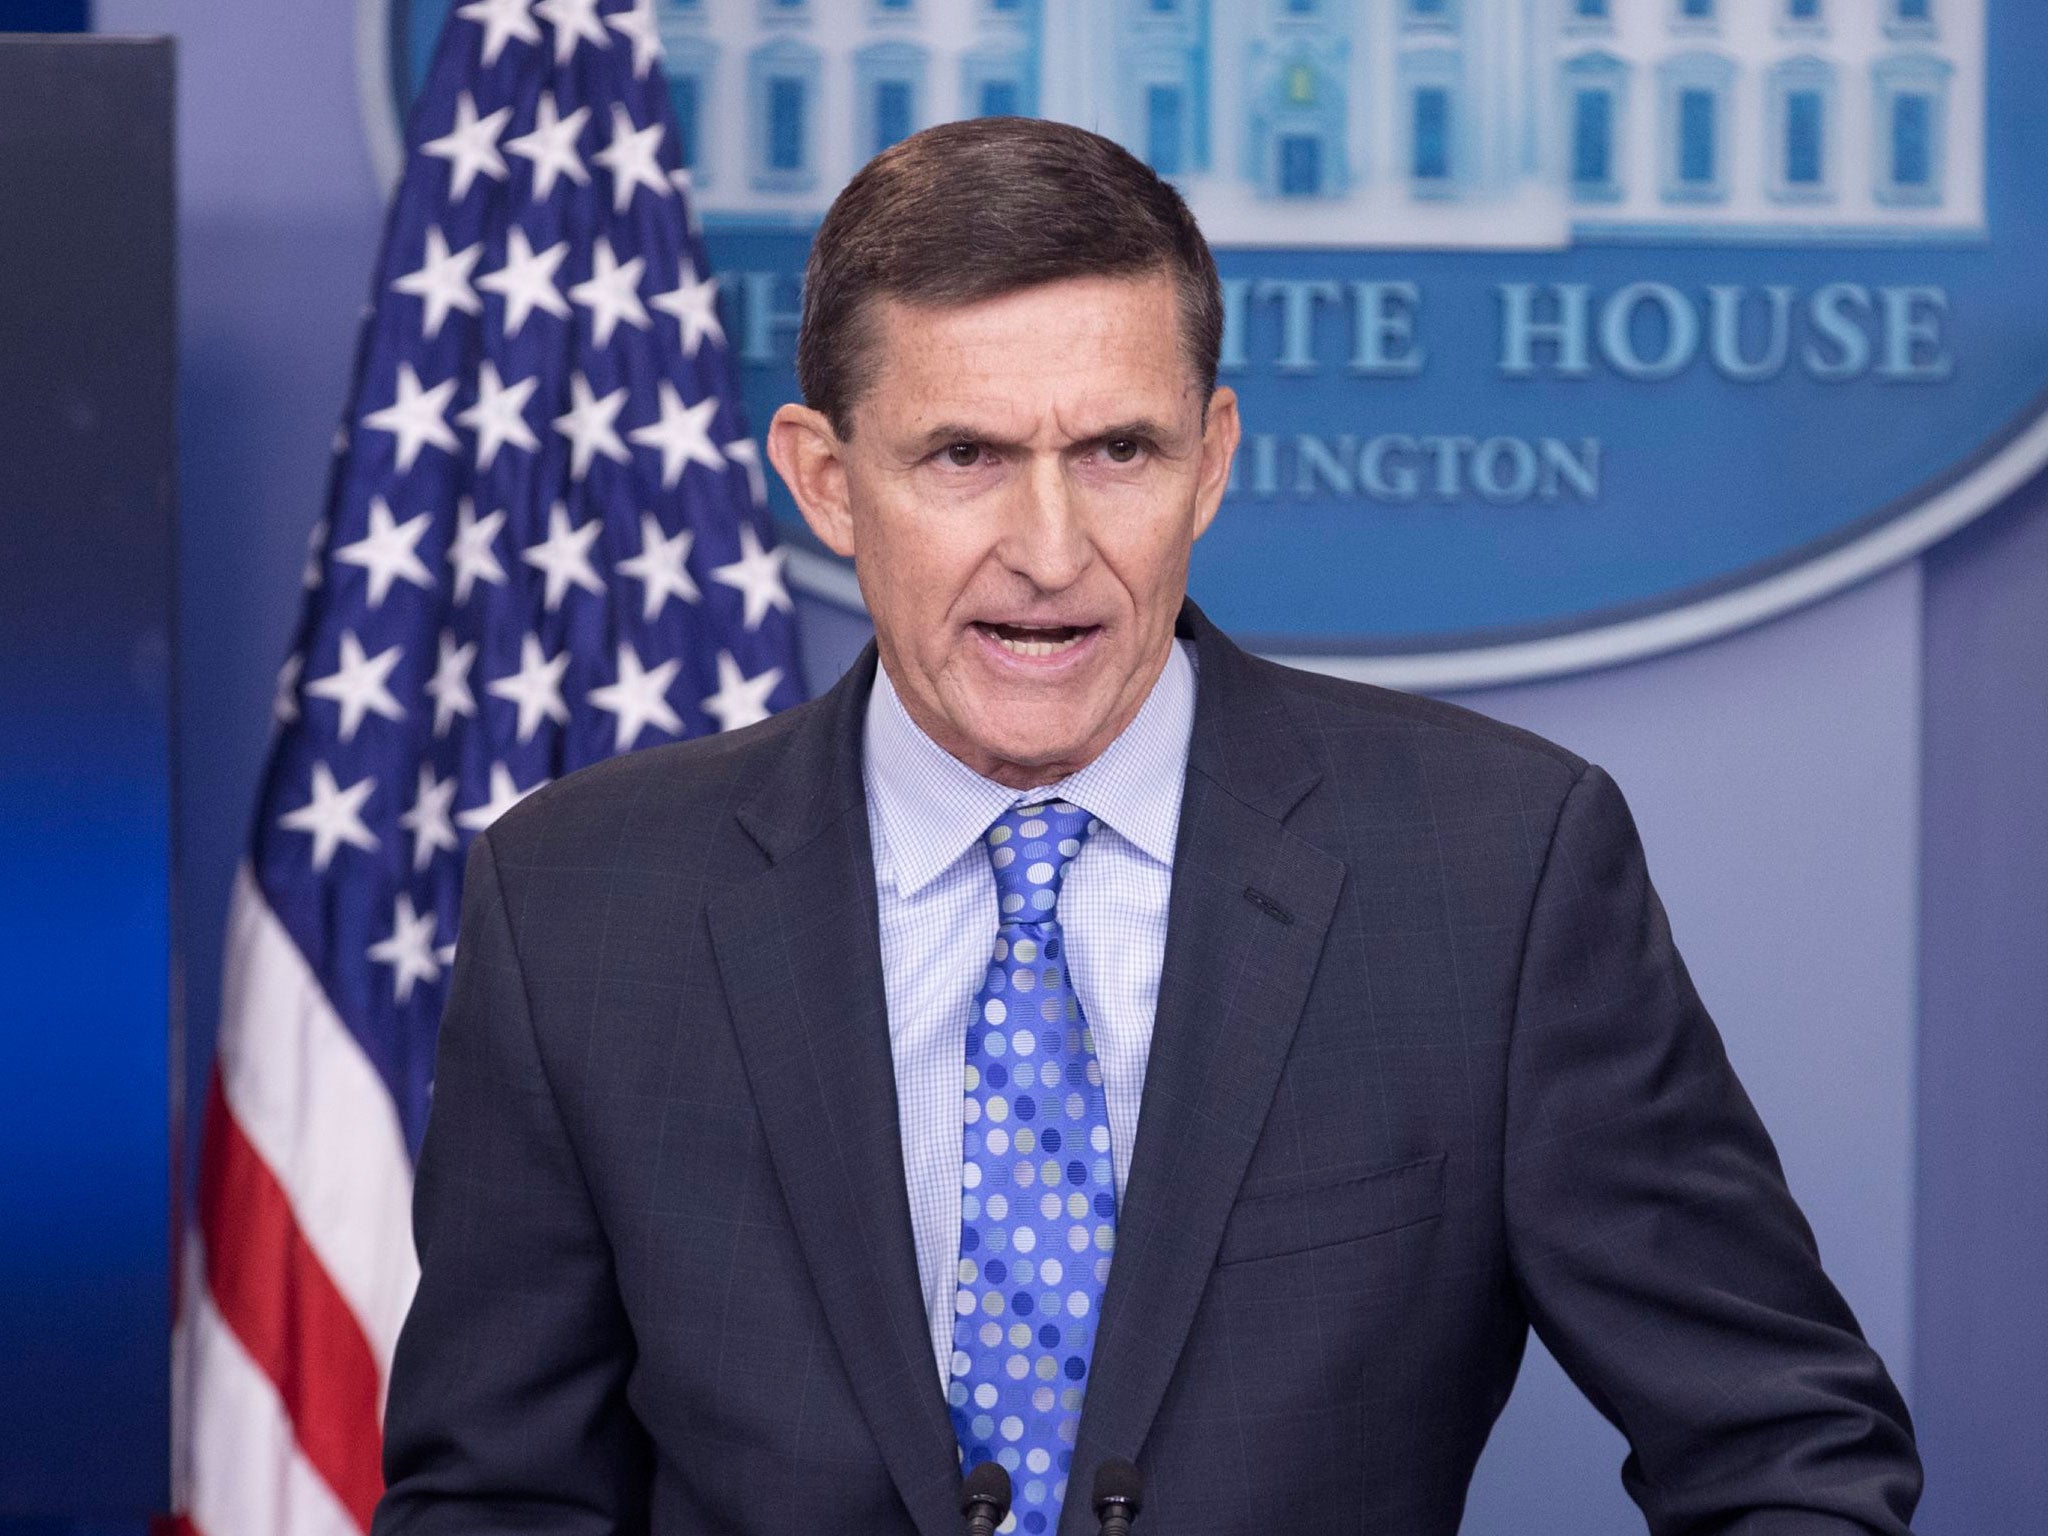 &#13;
National Security Advisor Michael Flynn claimed Iran was the world's leading sponsor of terrorism &#13;